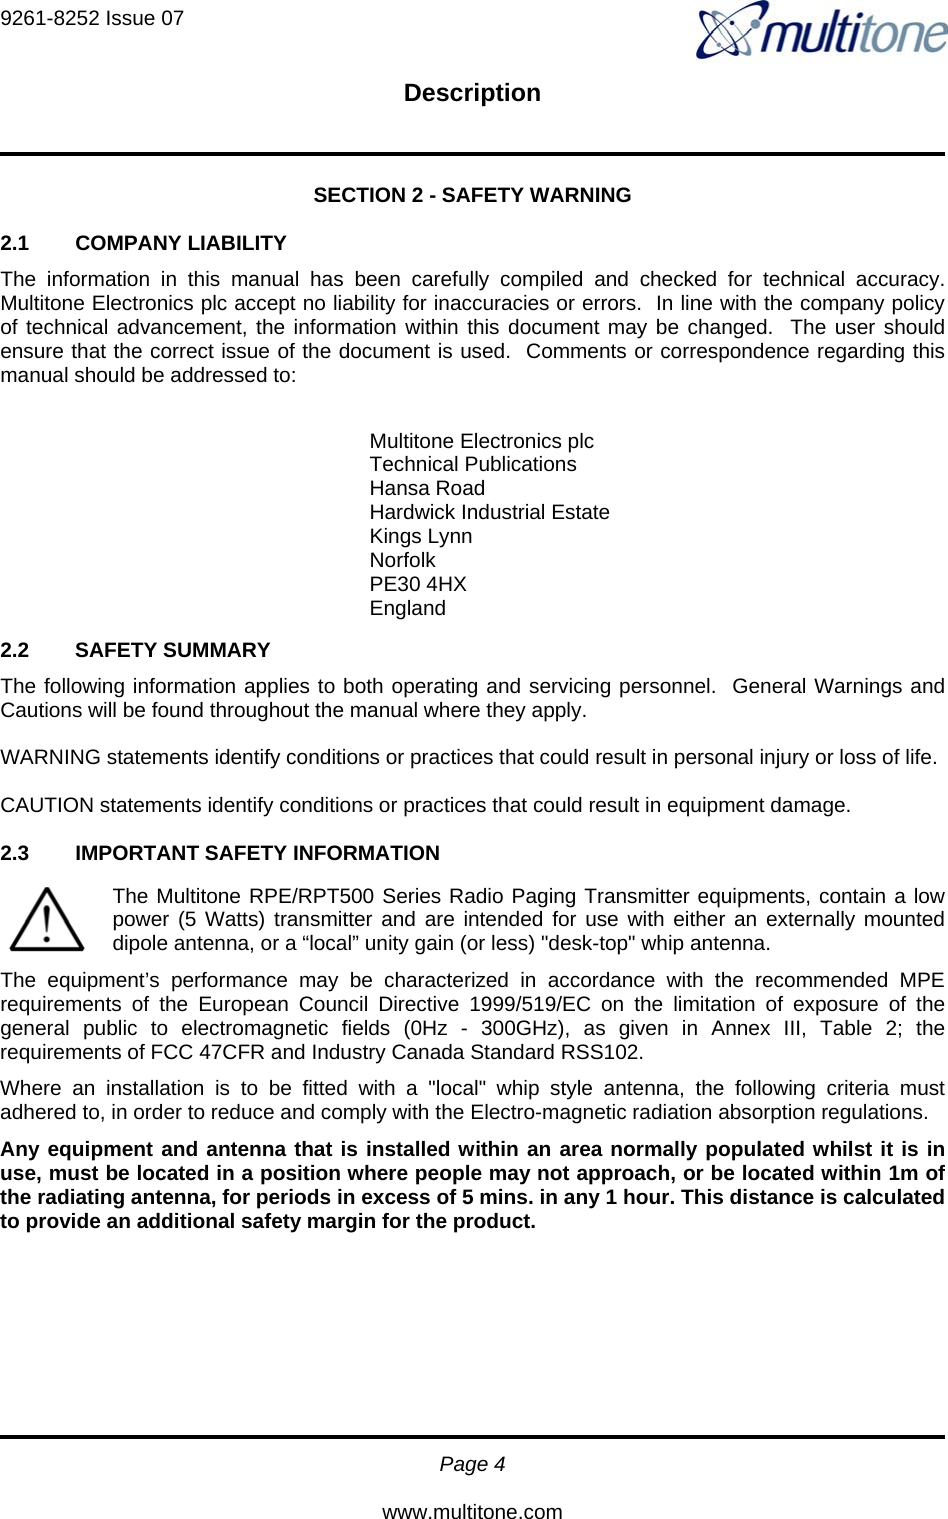 9261-8252 Issue 07   Description  Page 4  www.multitone.com SECTION 2 - SAFETY WARNING  2.1 COMPANY LIABILITY The information in this manual has been carefully compiled and checked for technical accuracy.  Multitone Electronics plc accept no liability for inaccuracies or errors.  In line with the company policy of technical advancement, the information within this document may be changed.  The user should ensure that the correct issue of the document is used.  Comments or correspondence regarding this manual should be addressed to:  2.2 SAFETY SUMMARY The following information applies to both operating and servicing personnel.  General Warnings and Cautions will be found throughout the manual where they apply.  WARNING statements identify conditions or practices that could result in personal injury or loss of life.  CAUTION statements identify conditions or practices that could result in equipment damage.  2.3  IMPORTANT SAFETY INFORMATION The Multitone RPE/RPT500 Series Radio Paging Transmitter equipments, contain a low power (5 Watts) transmitter and are intended for use with either an externally mounted dipole antenna, or a “local” unity gain (or less) &quot;desk-top&quot; whip antenna. The equipment’s performance may be characterized in accordance with the recommended MPE requirements of the European Council Directive 1999/519/EC on the limitation of exposure of the general public to electromagnetic fields (0Hz - 300GHz), as given in Annex III, Table 2; the requirements of FCC 47CFR and Industry Canada Standard RSS102. Where an installation is to be fitted with a &quot;local&quot; whip style antenna, the following criteria must adhered to, in order to reduce and comply with the Electro-magnetic radiation absorption regulations. Any equipment and antenna that is installed within an area normally populated whilst it is in use, must be located in a position where people may not approach, or be located within 1m of the radiating antenna, for periods in excess of 5 mins. in any 1 hour. This distance is calculated to provide an additional safety margin for the product. Multitone Electronics plc  Technical Publications Hansa Road Hardwick Industrial Estate Kings Lynn Norfolk PE30 4HX England 